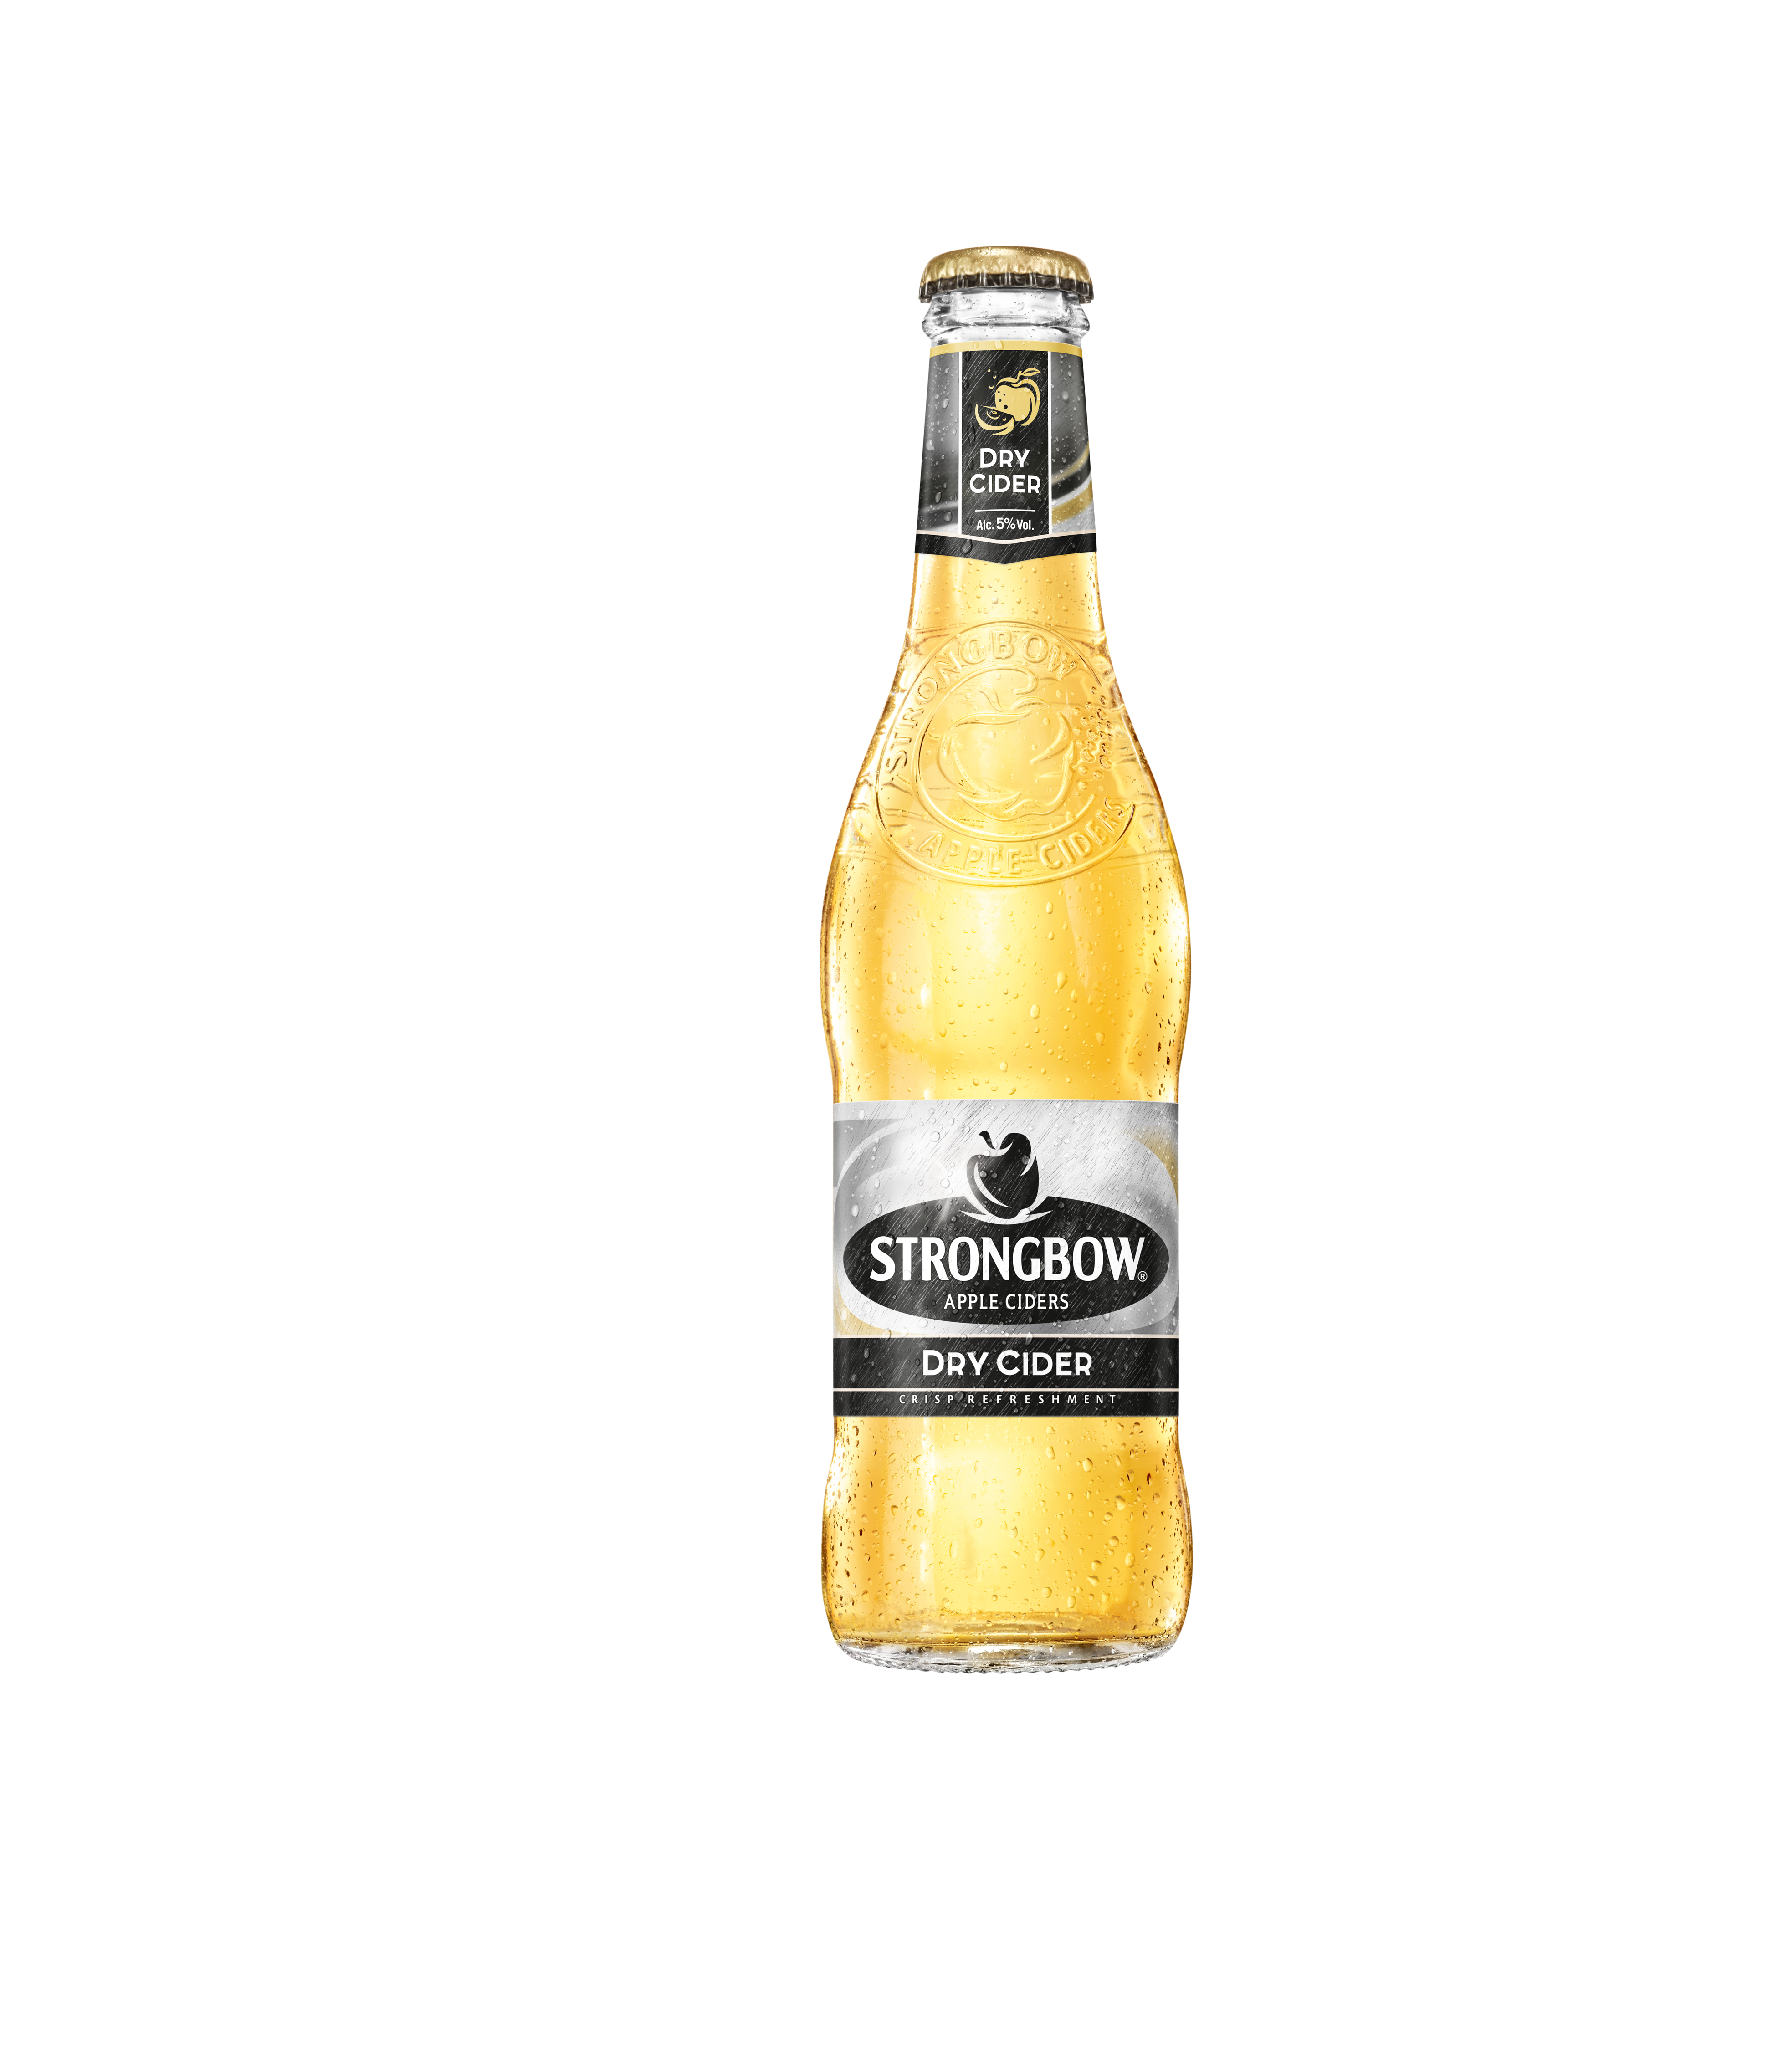 Strongbow Dry Cider Bottle (Old Label) Hero Product Image 3914X4549px